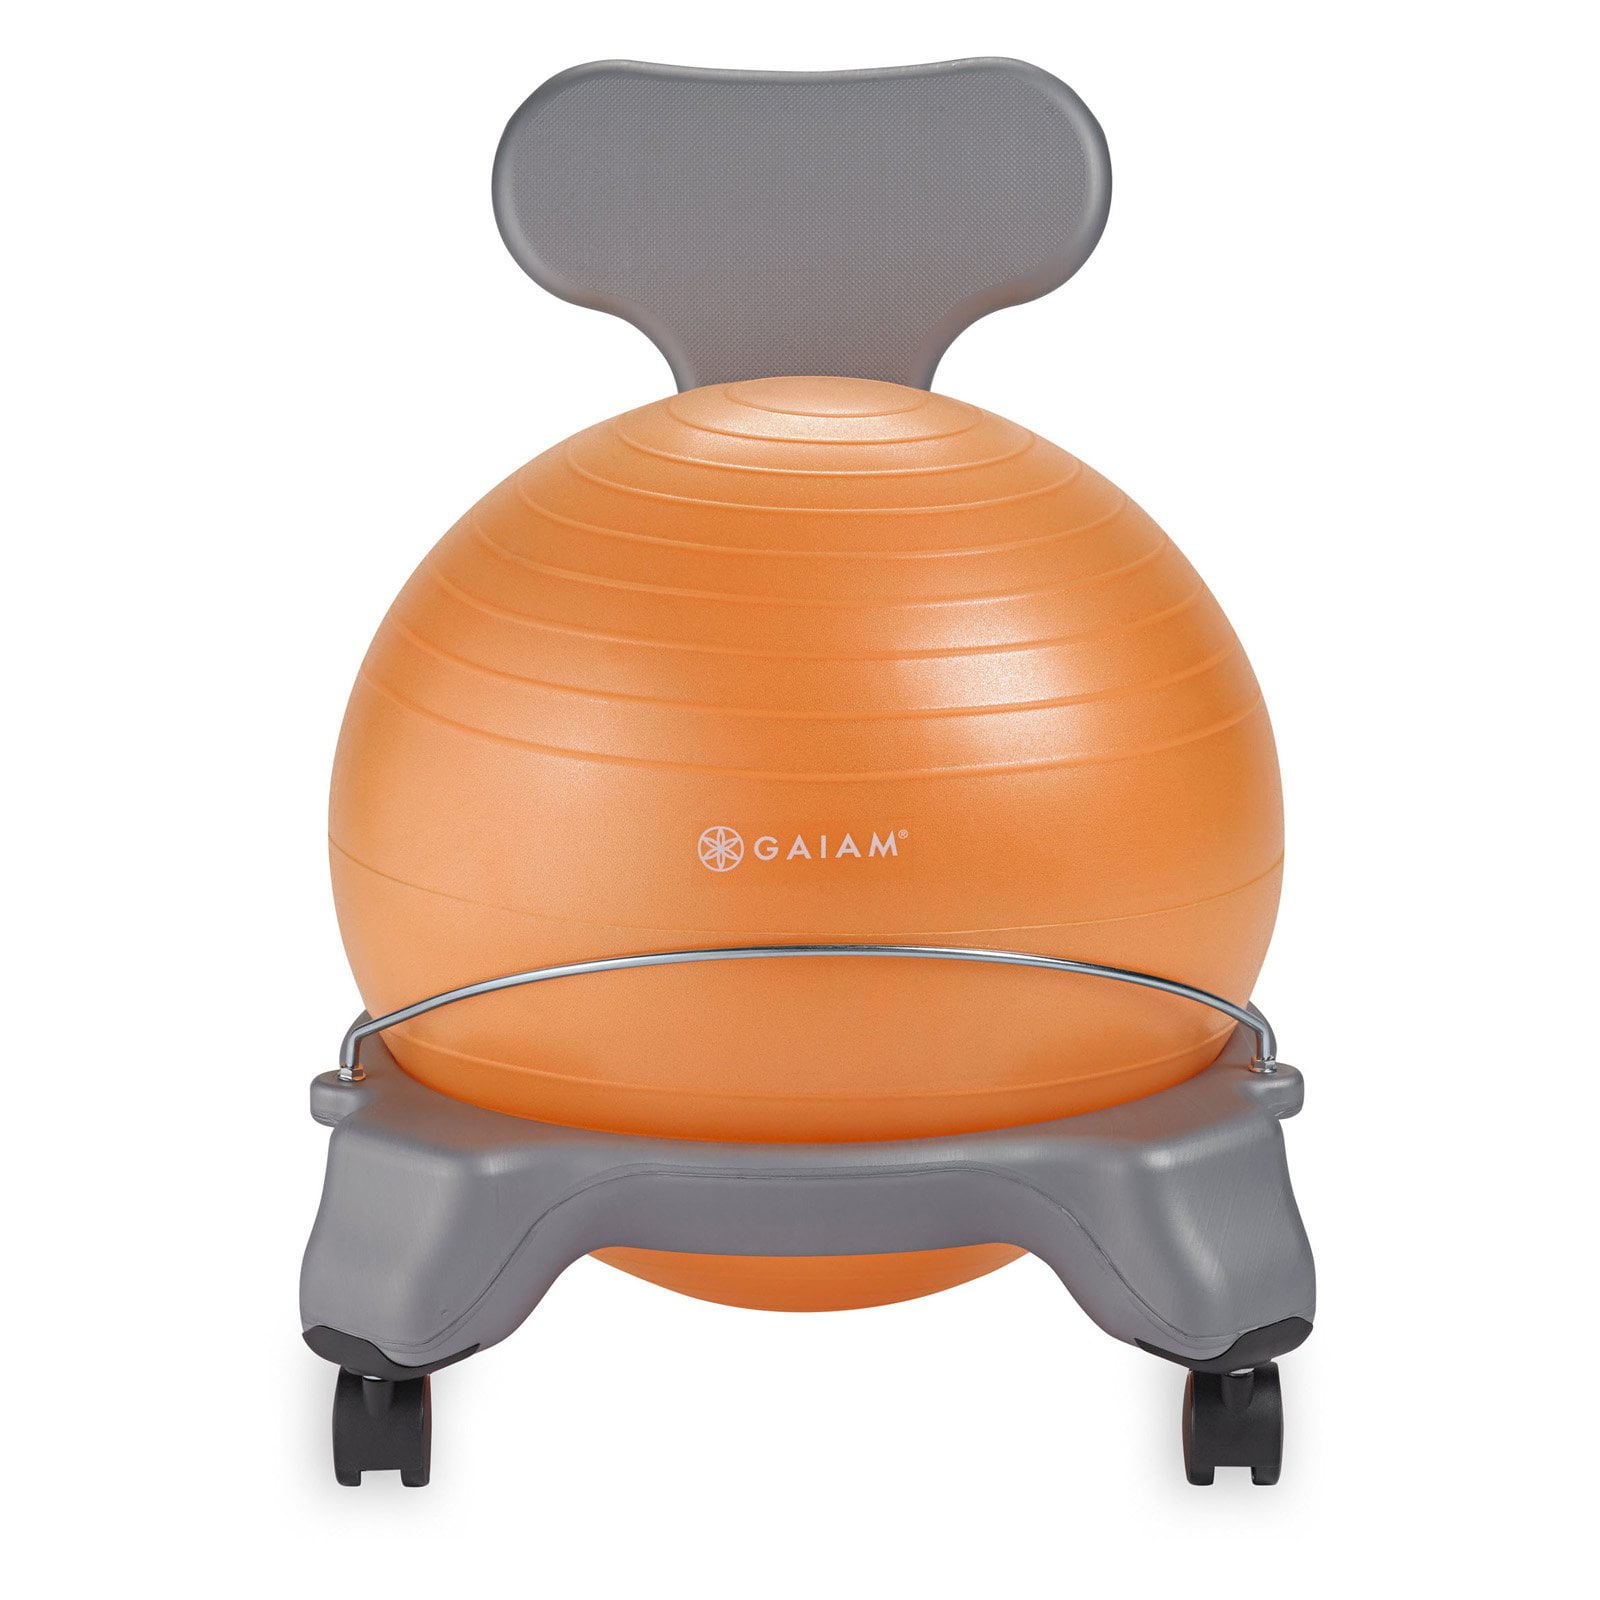 Child Classroom Desk Seating Certified Refurbished Gaiam Kids Balance Ball Chair Classic Childrens Stability Ball Chair 